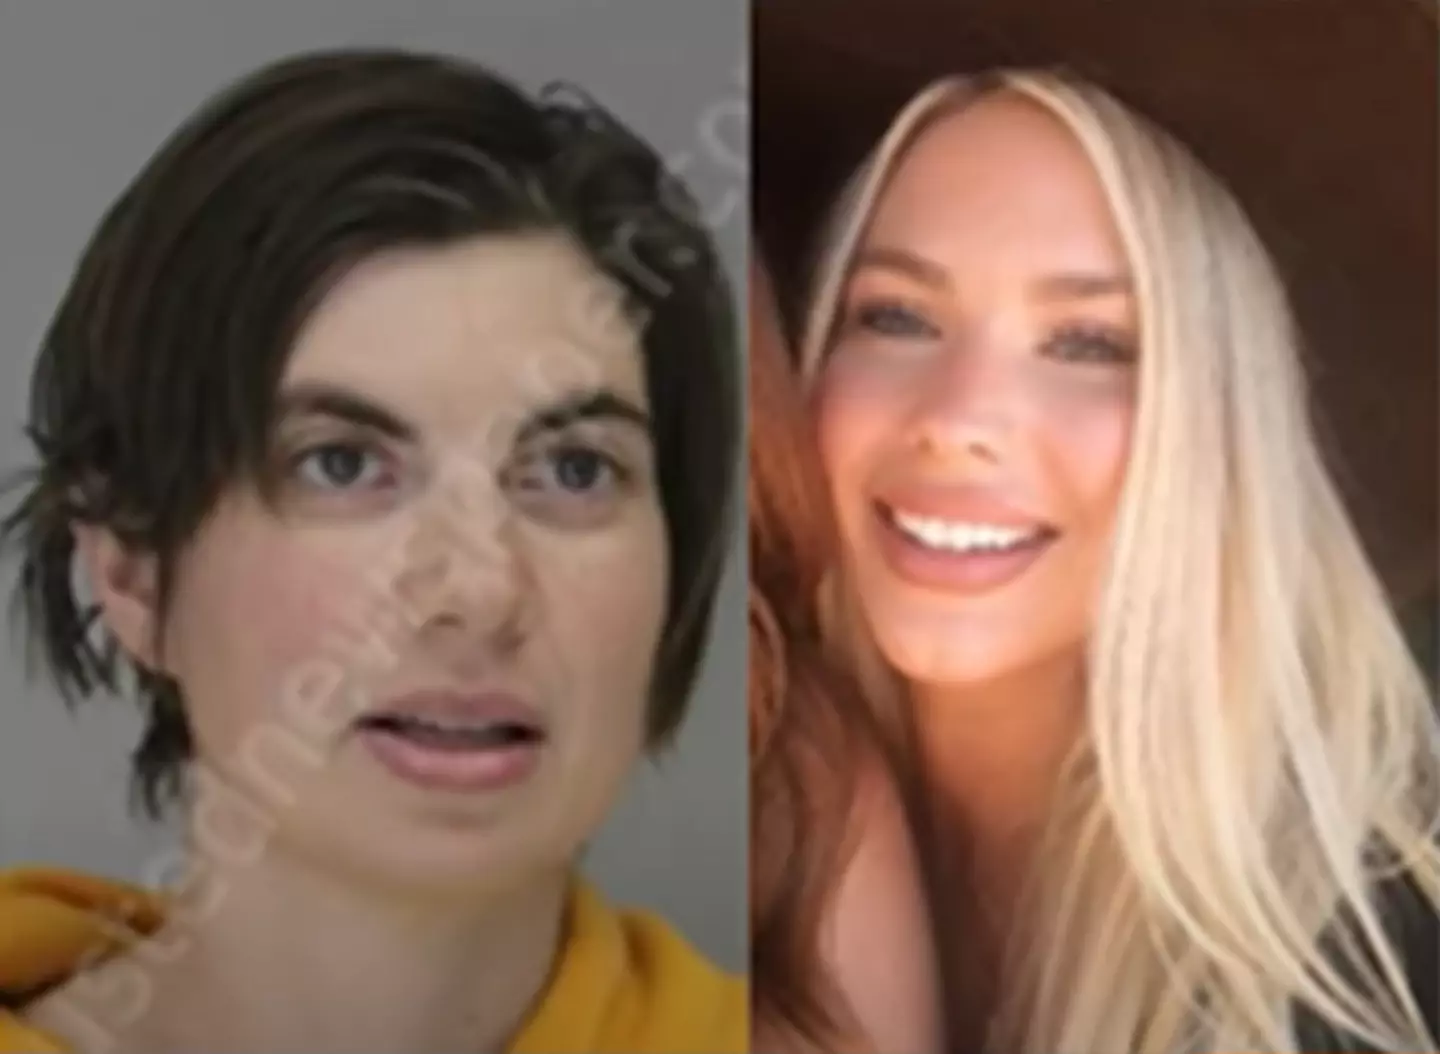 Bethany K Farber (right) was mistaken for another woman (KTLA/YouTube)